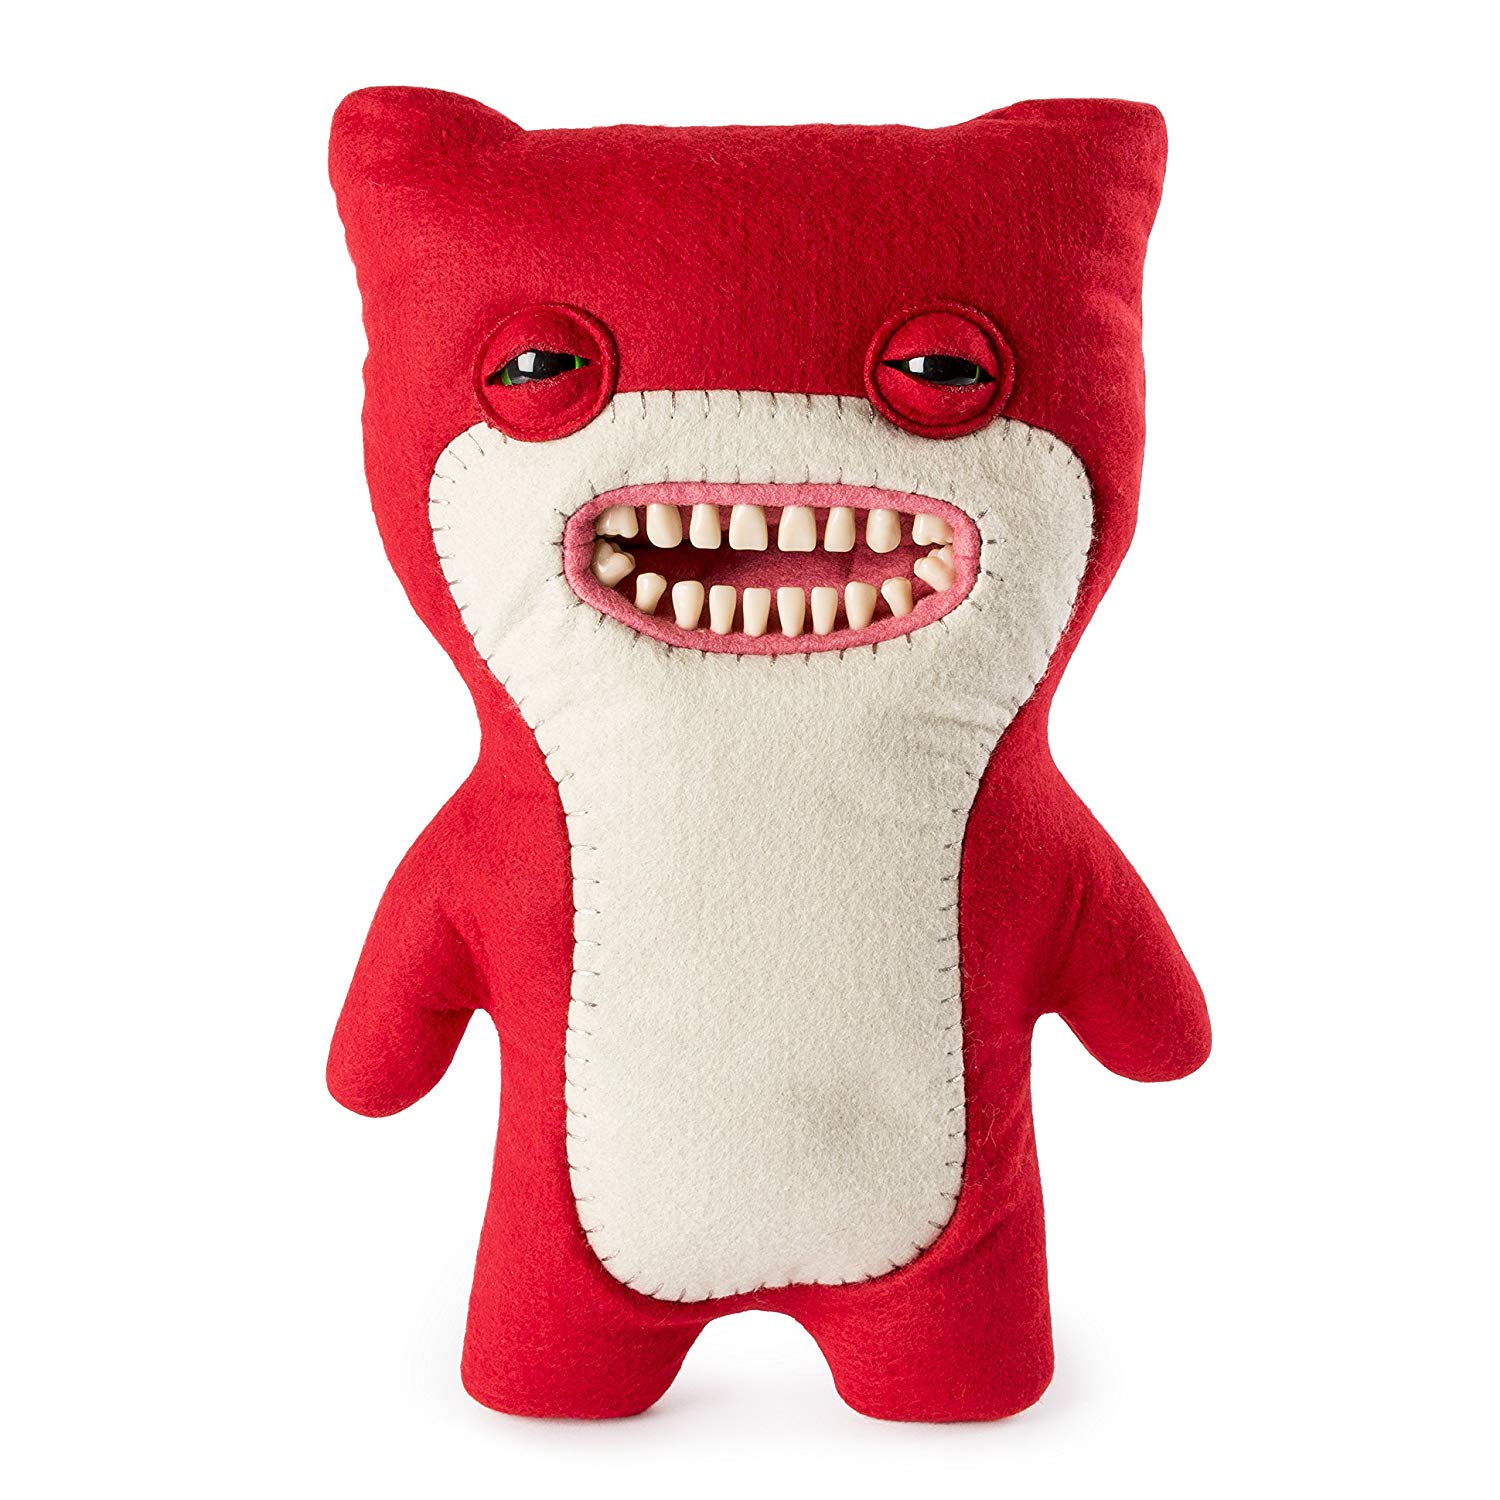 Fugglers Fuggler — Funny Ugly Monster, 12 Inch Deluxe Plush Creature ...